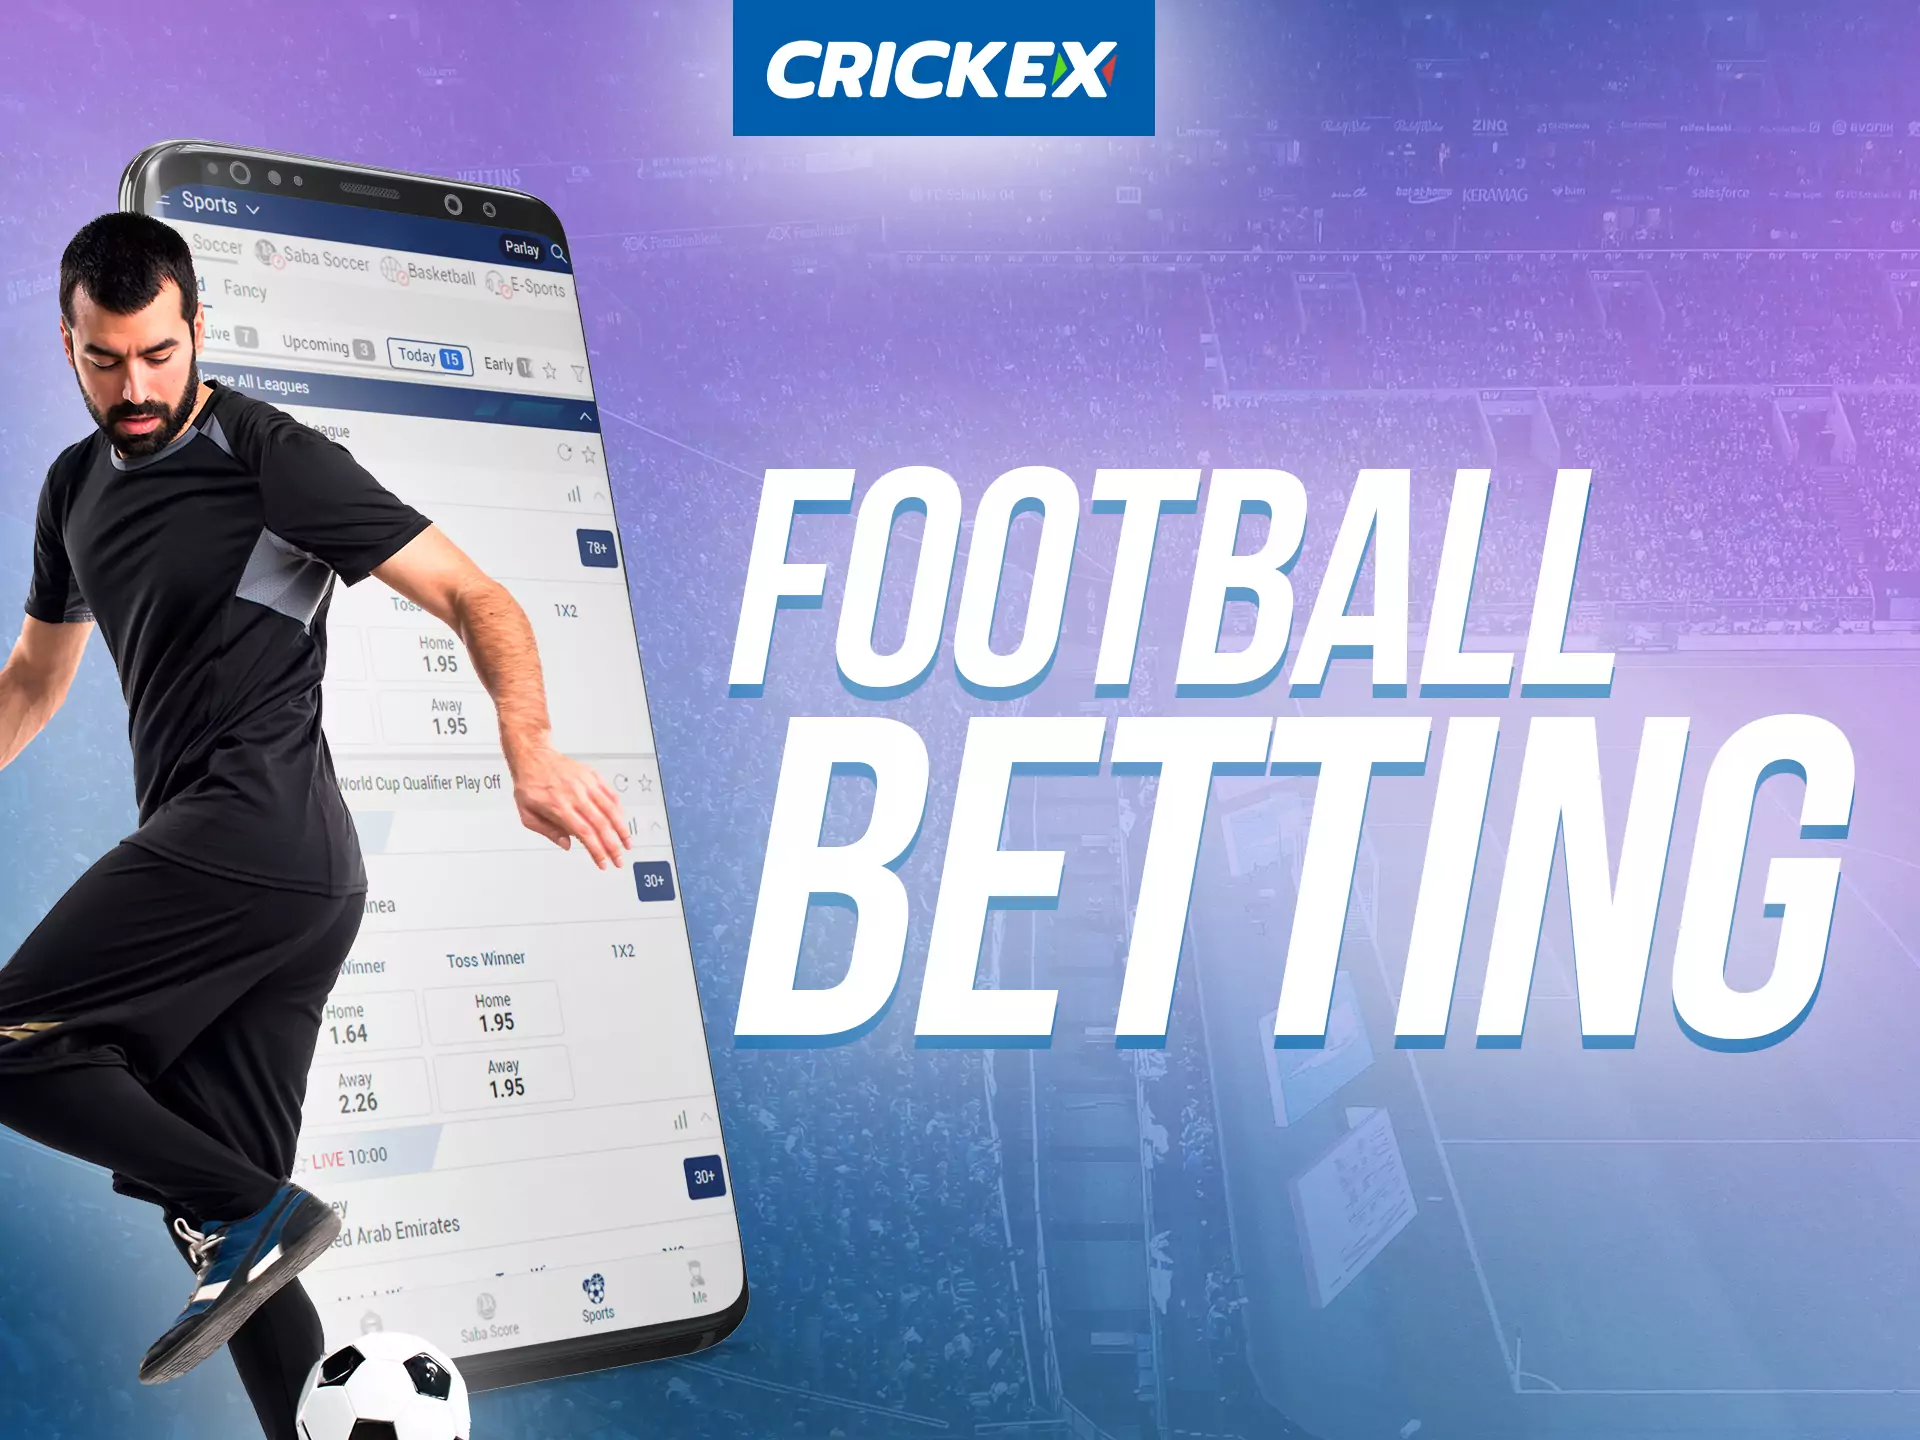 If you're a football fan, bet on matches in the Crickex app.